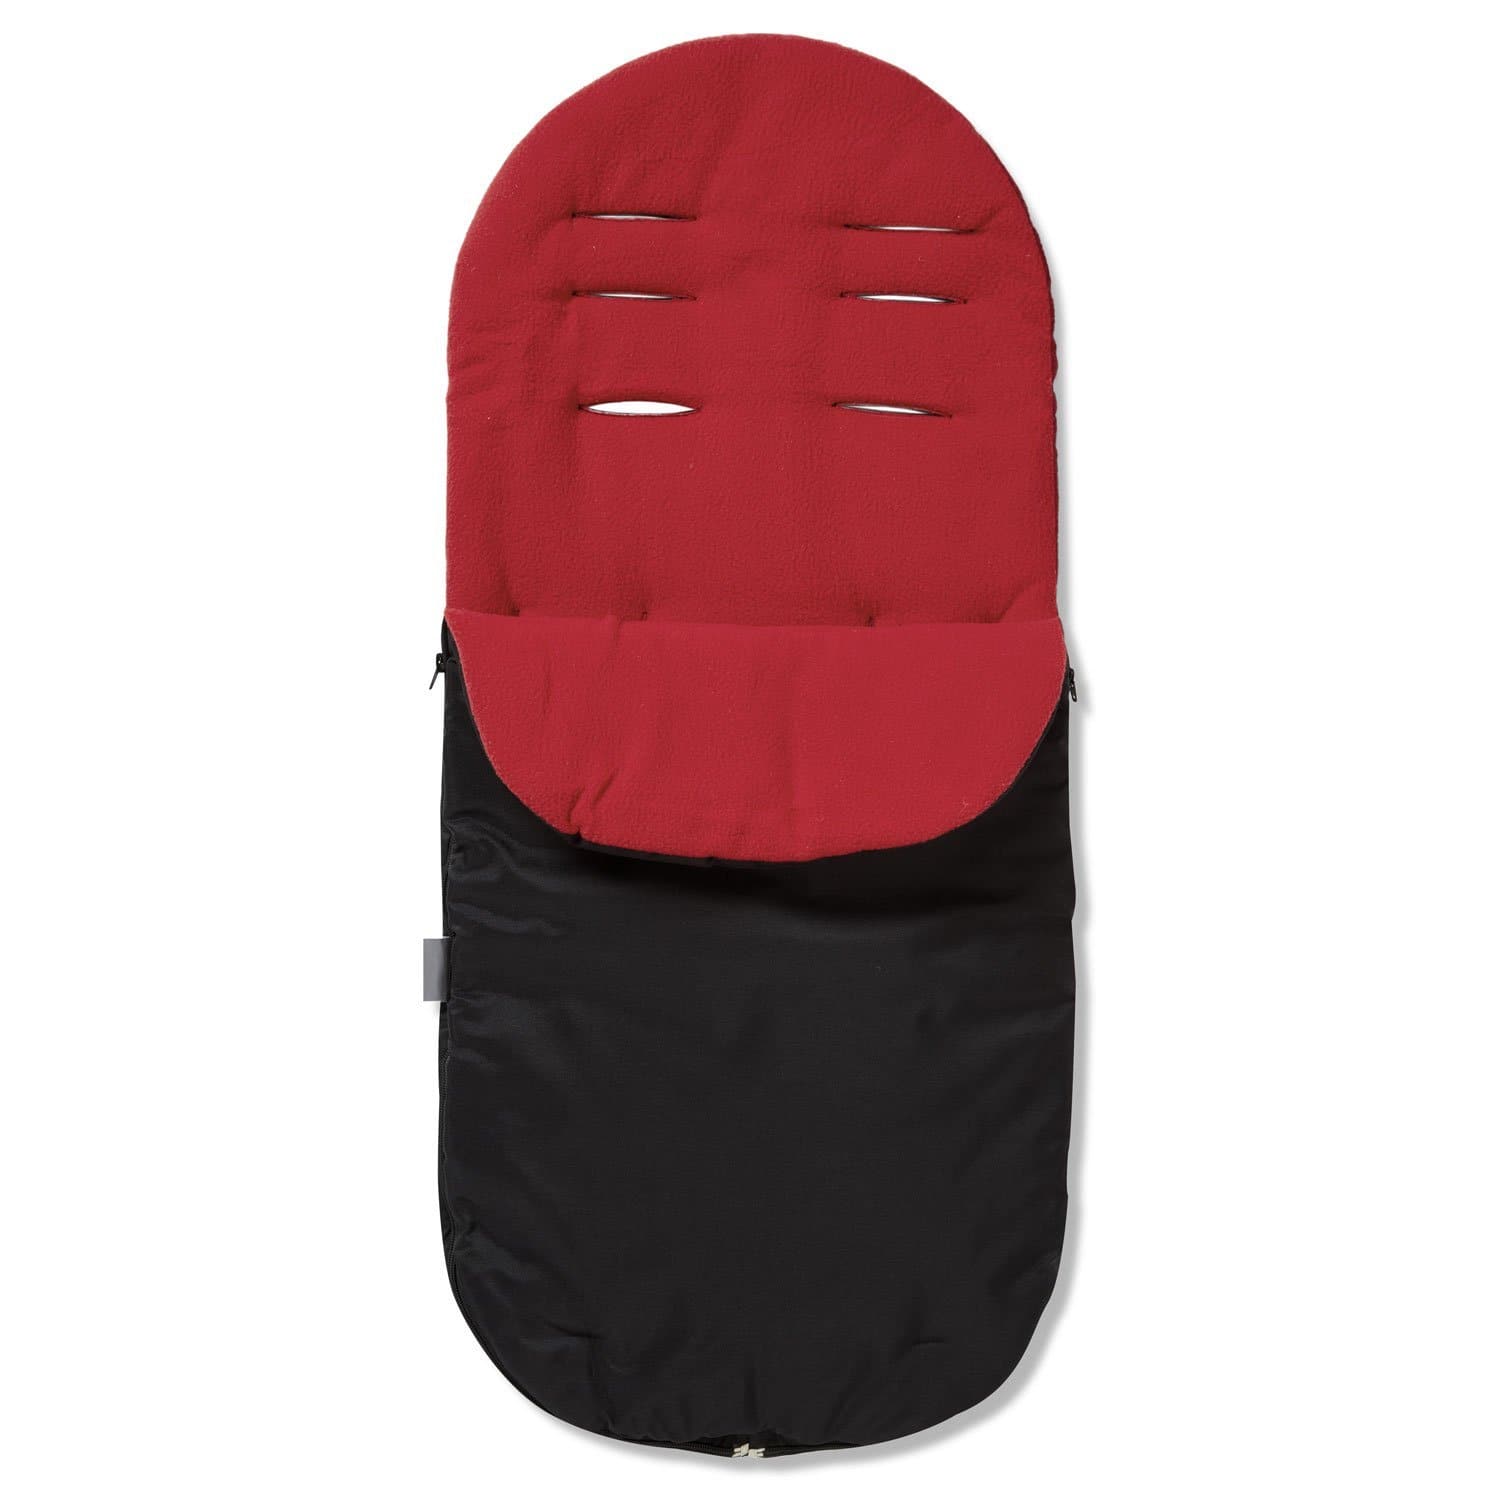 Footmuff / Cosy Toes Compatible with Hartan - Red / Fits All Models | For Your Little One